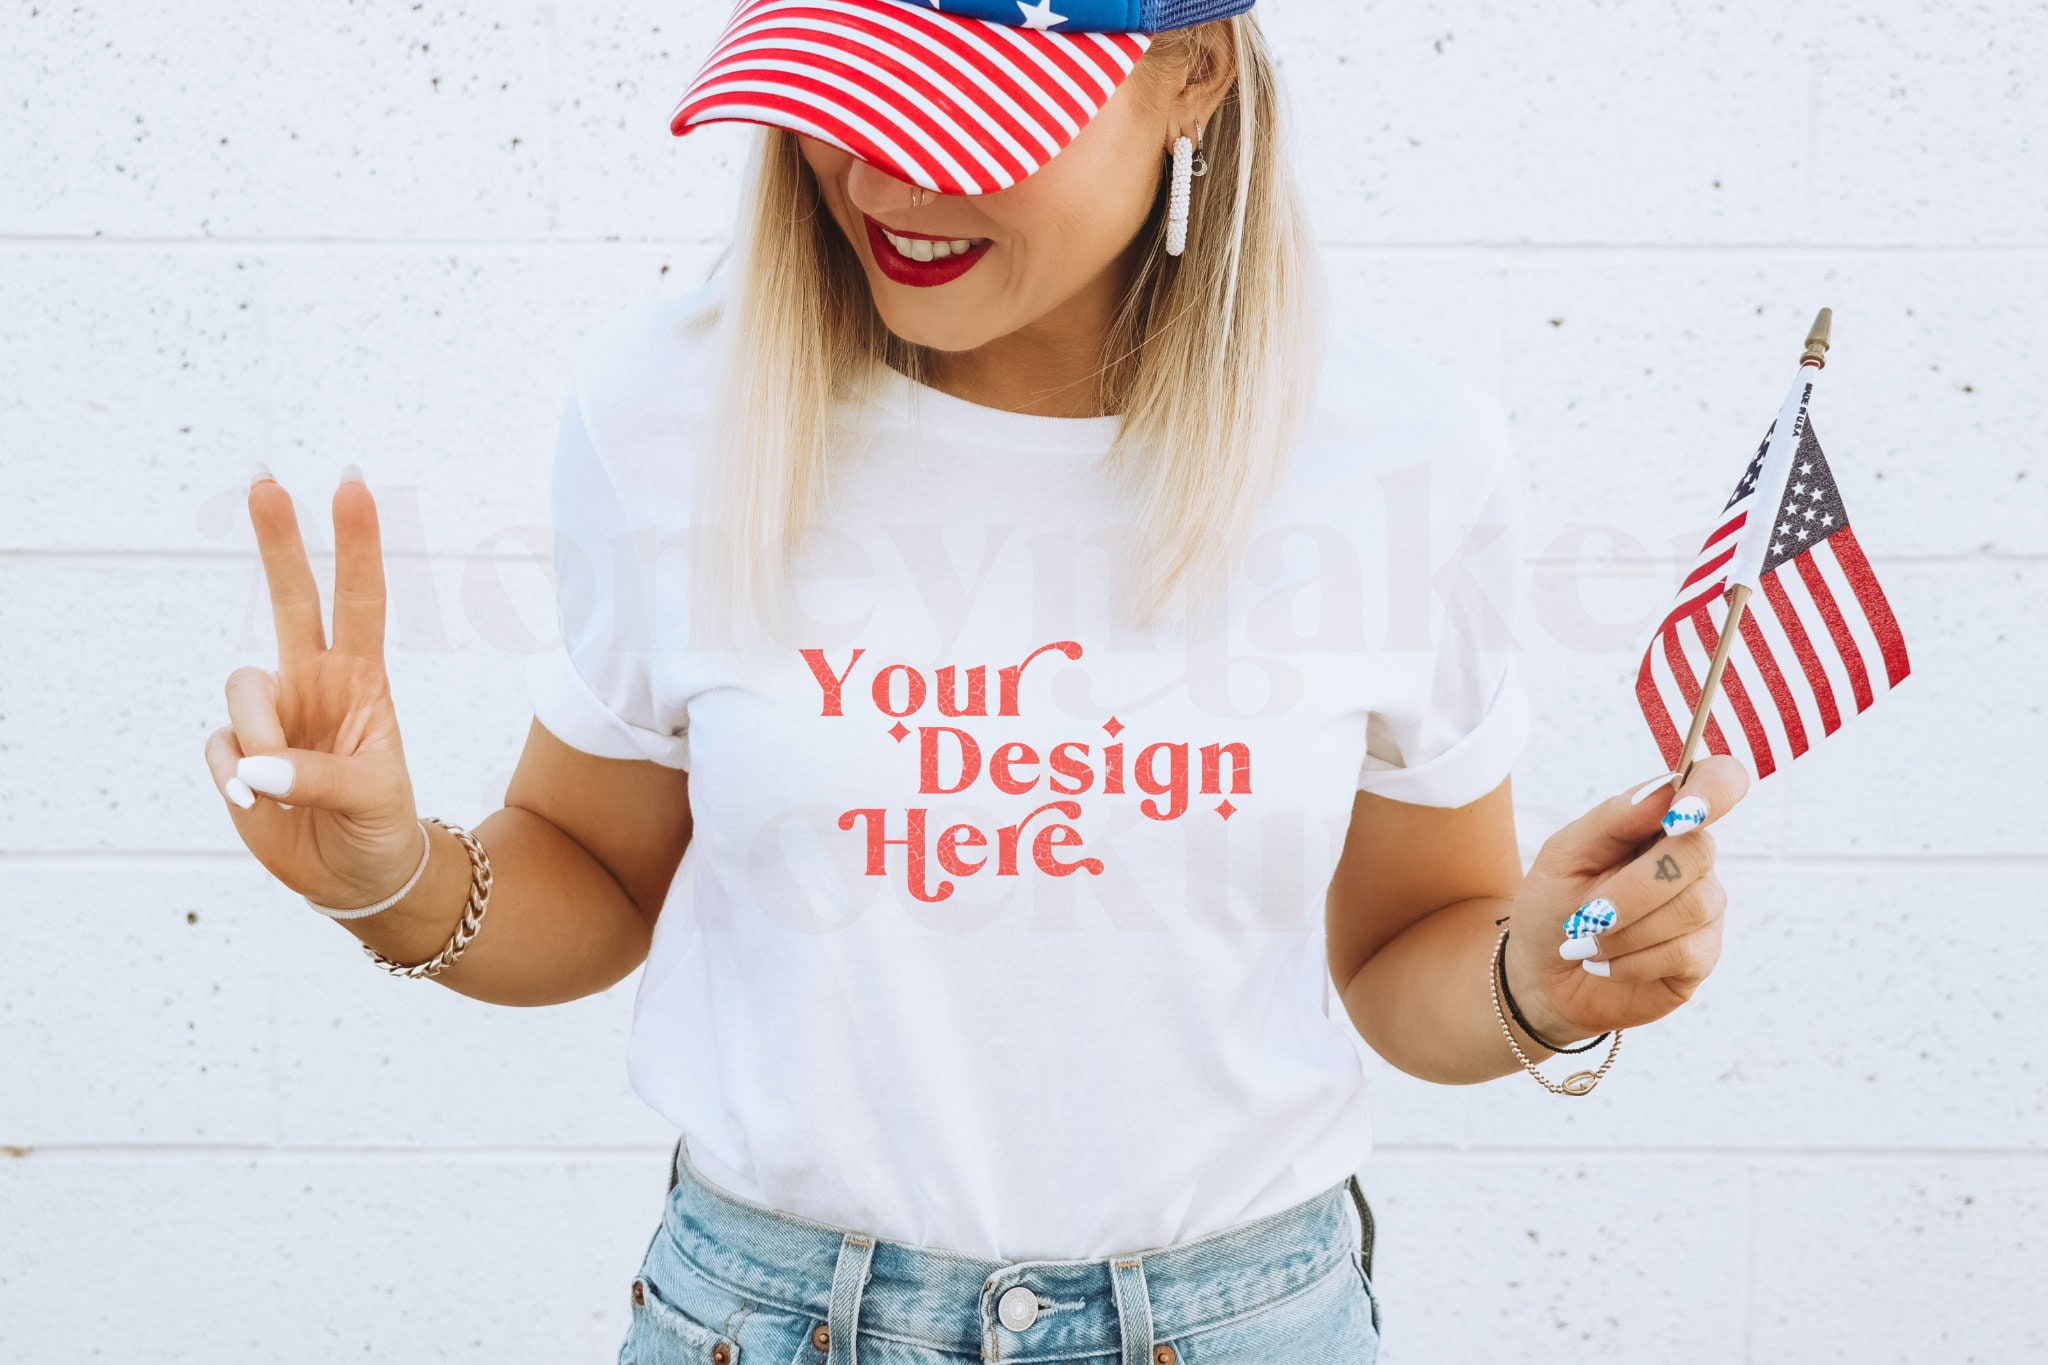  CHUOAND Independence Day Shirt Women Graphic,hot Deals